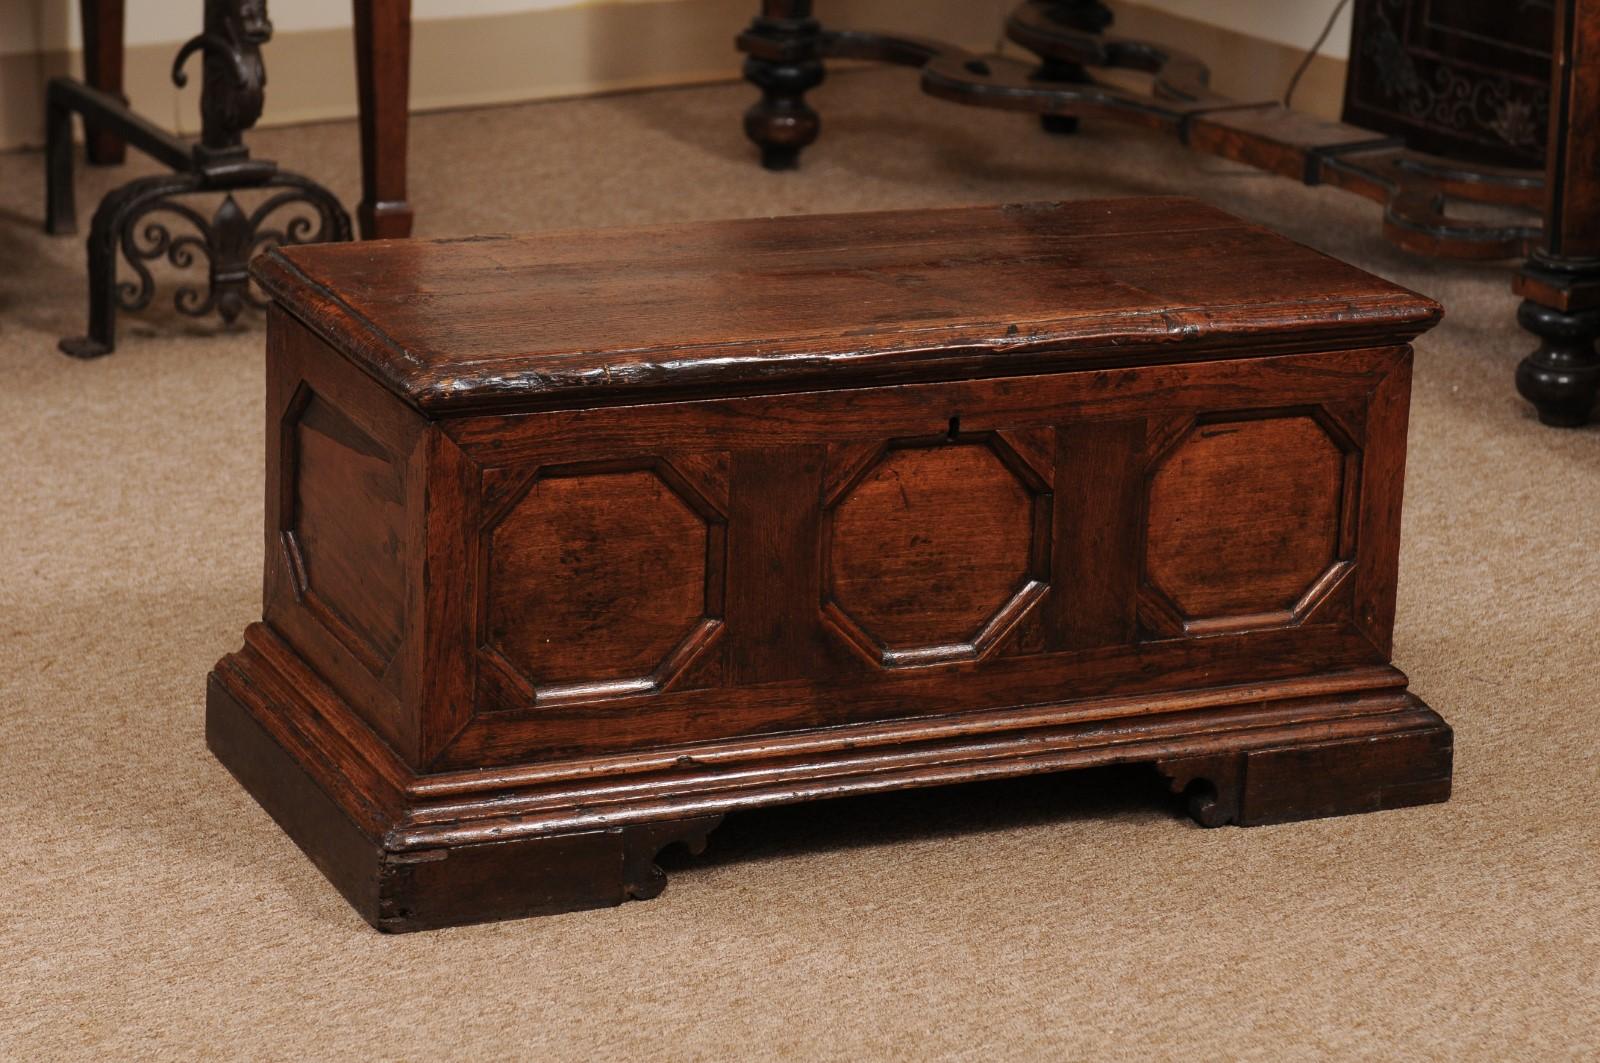 Pine coffer / trunk with hinged lid, octagonal carved designs, and bracket feet, 18th century.